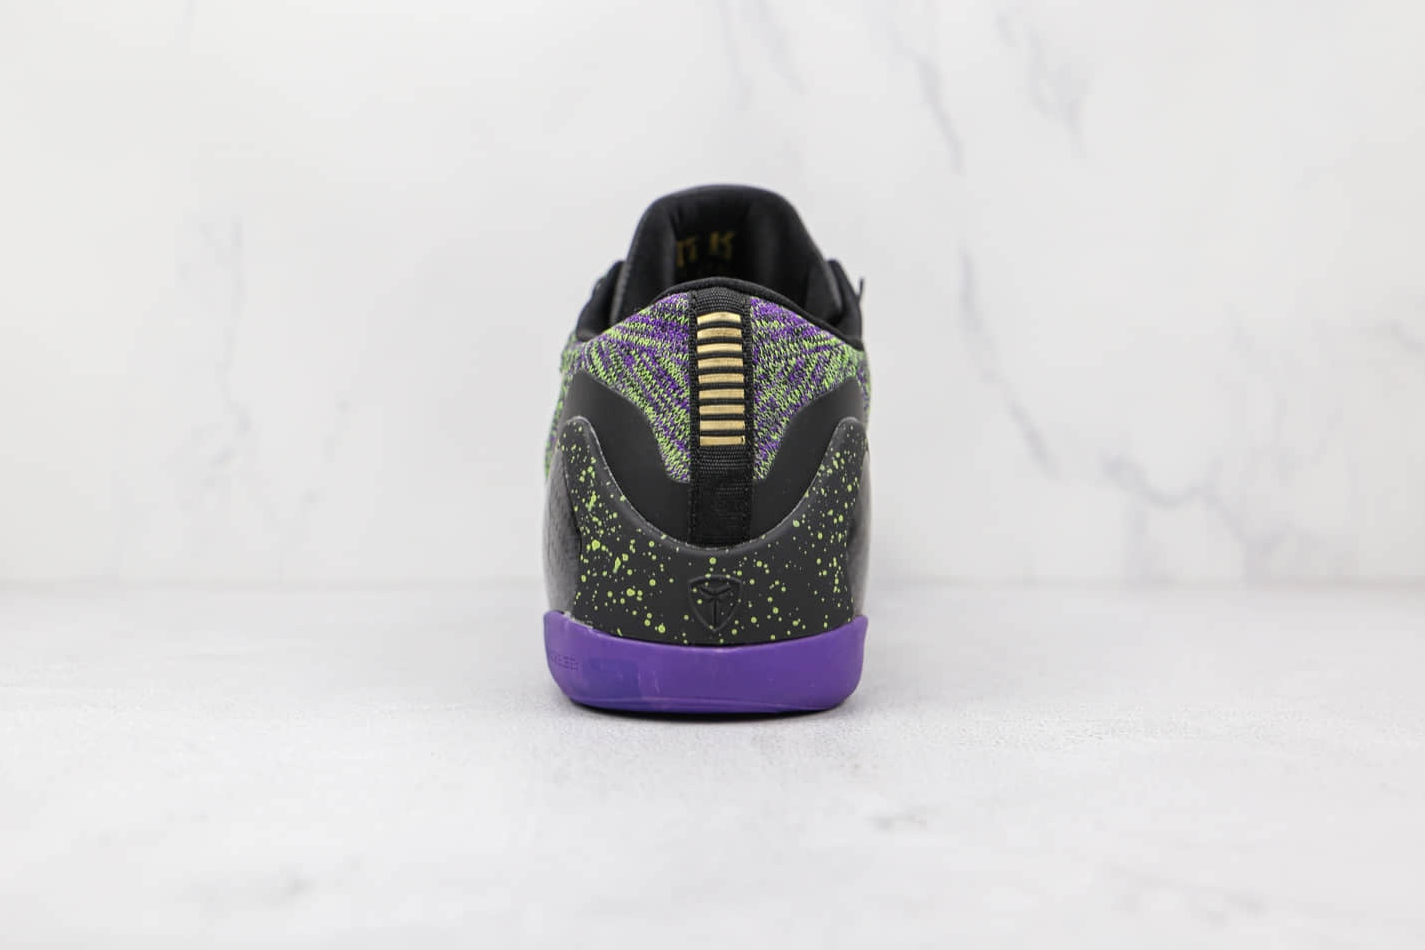 Nike Kobe 9 Elite Low 'Mamba Moment' iD 677992-998 - Shop Now for Exclusive Kobe Bryant Sneakers